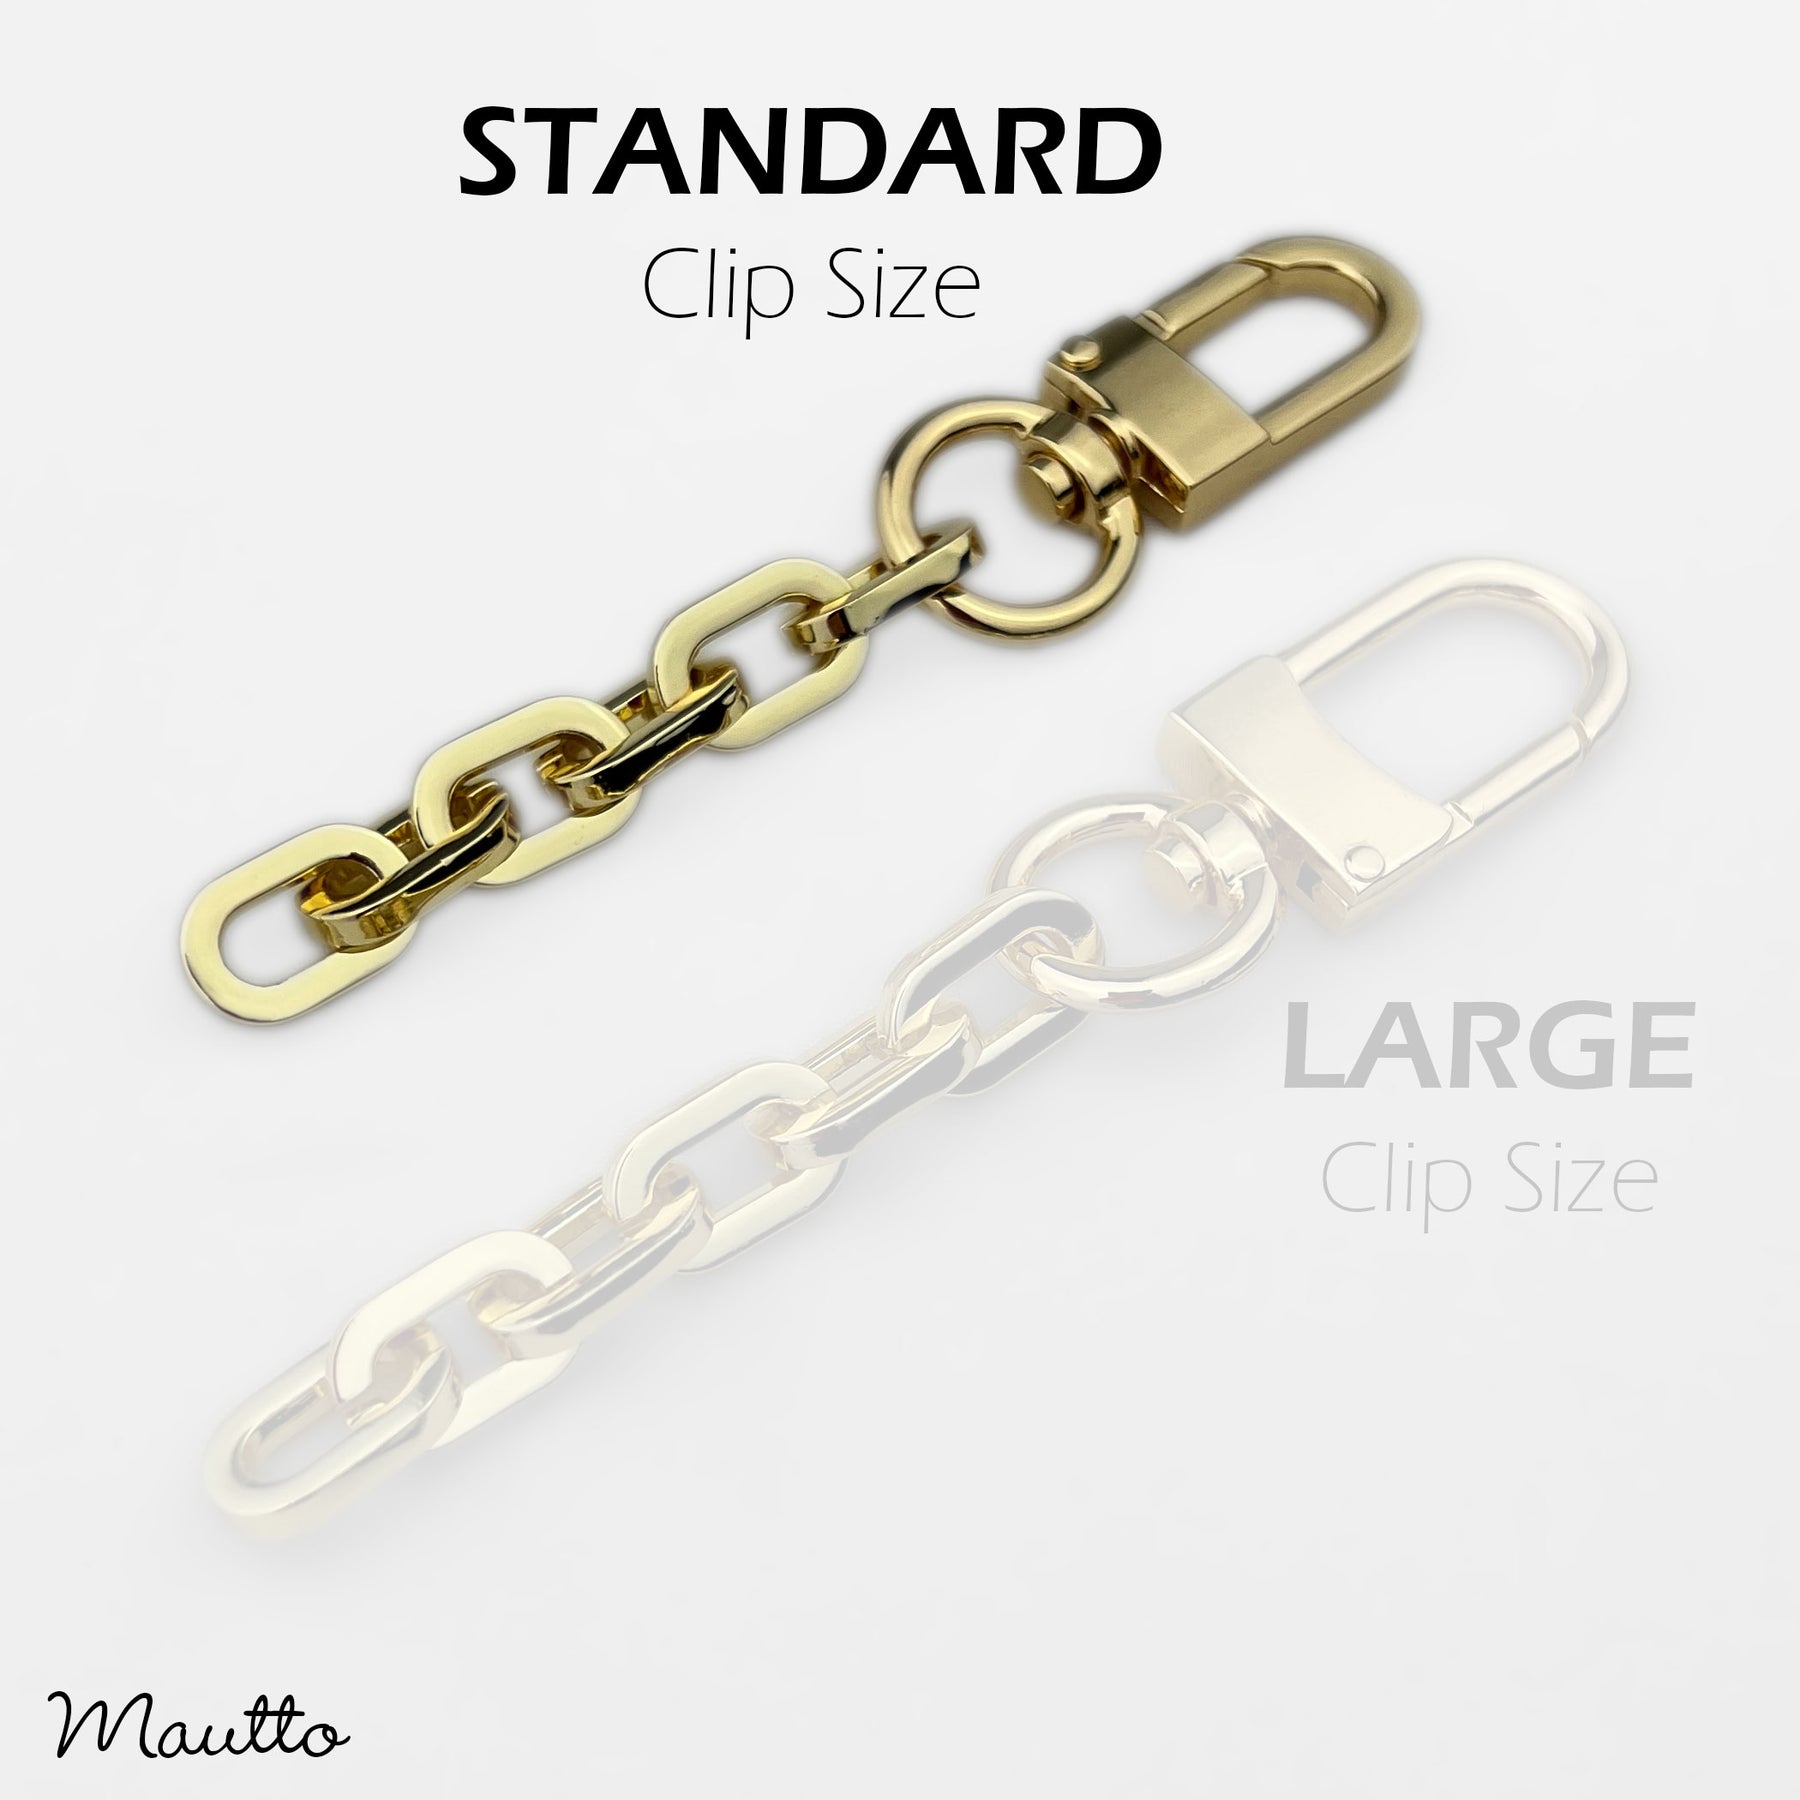 Chain Strap Extender Accessory for Louis Vuitton & More - Elongated Box  Chain with #16C LG Hook, Replacement Purse Straps & Handbag Accessories -  Leather, Chain & more